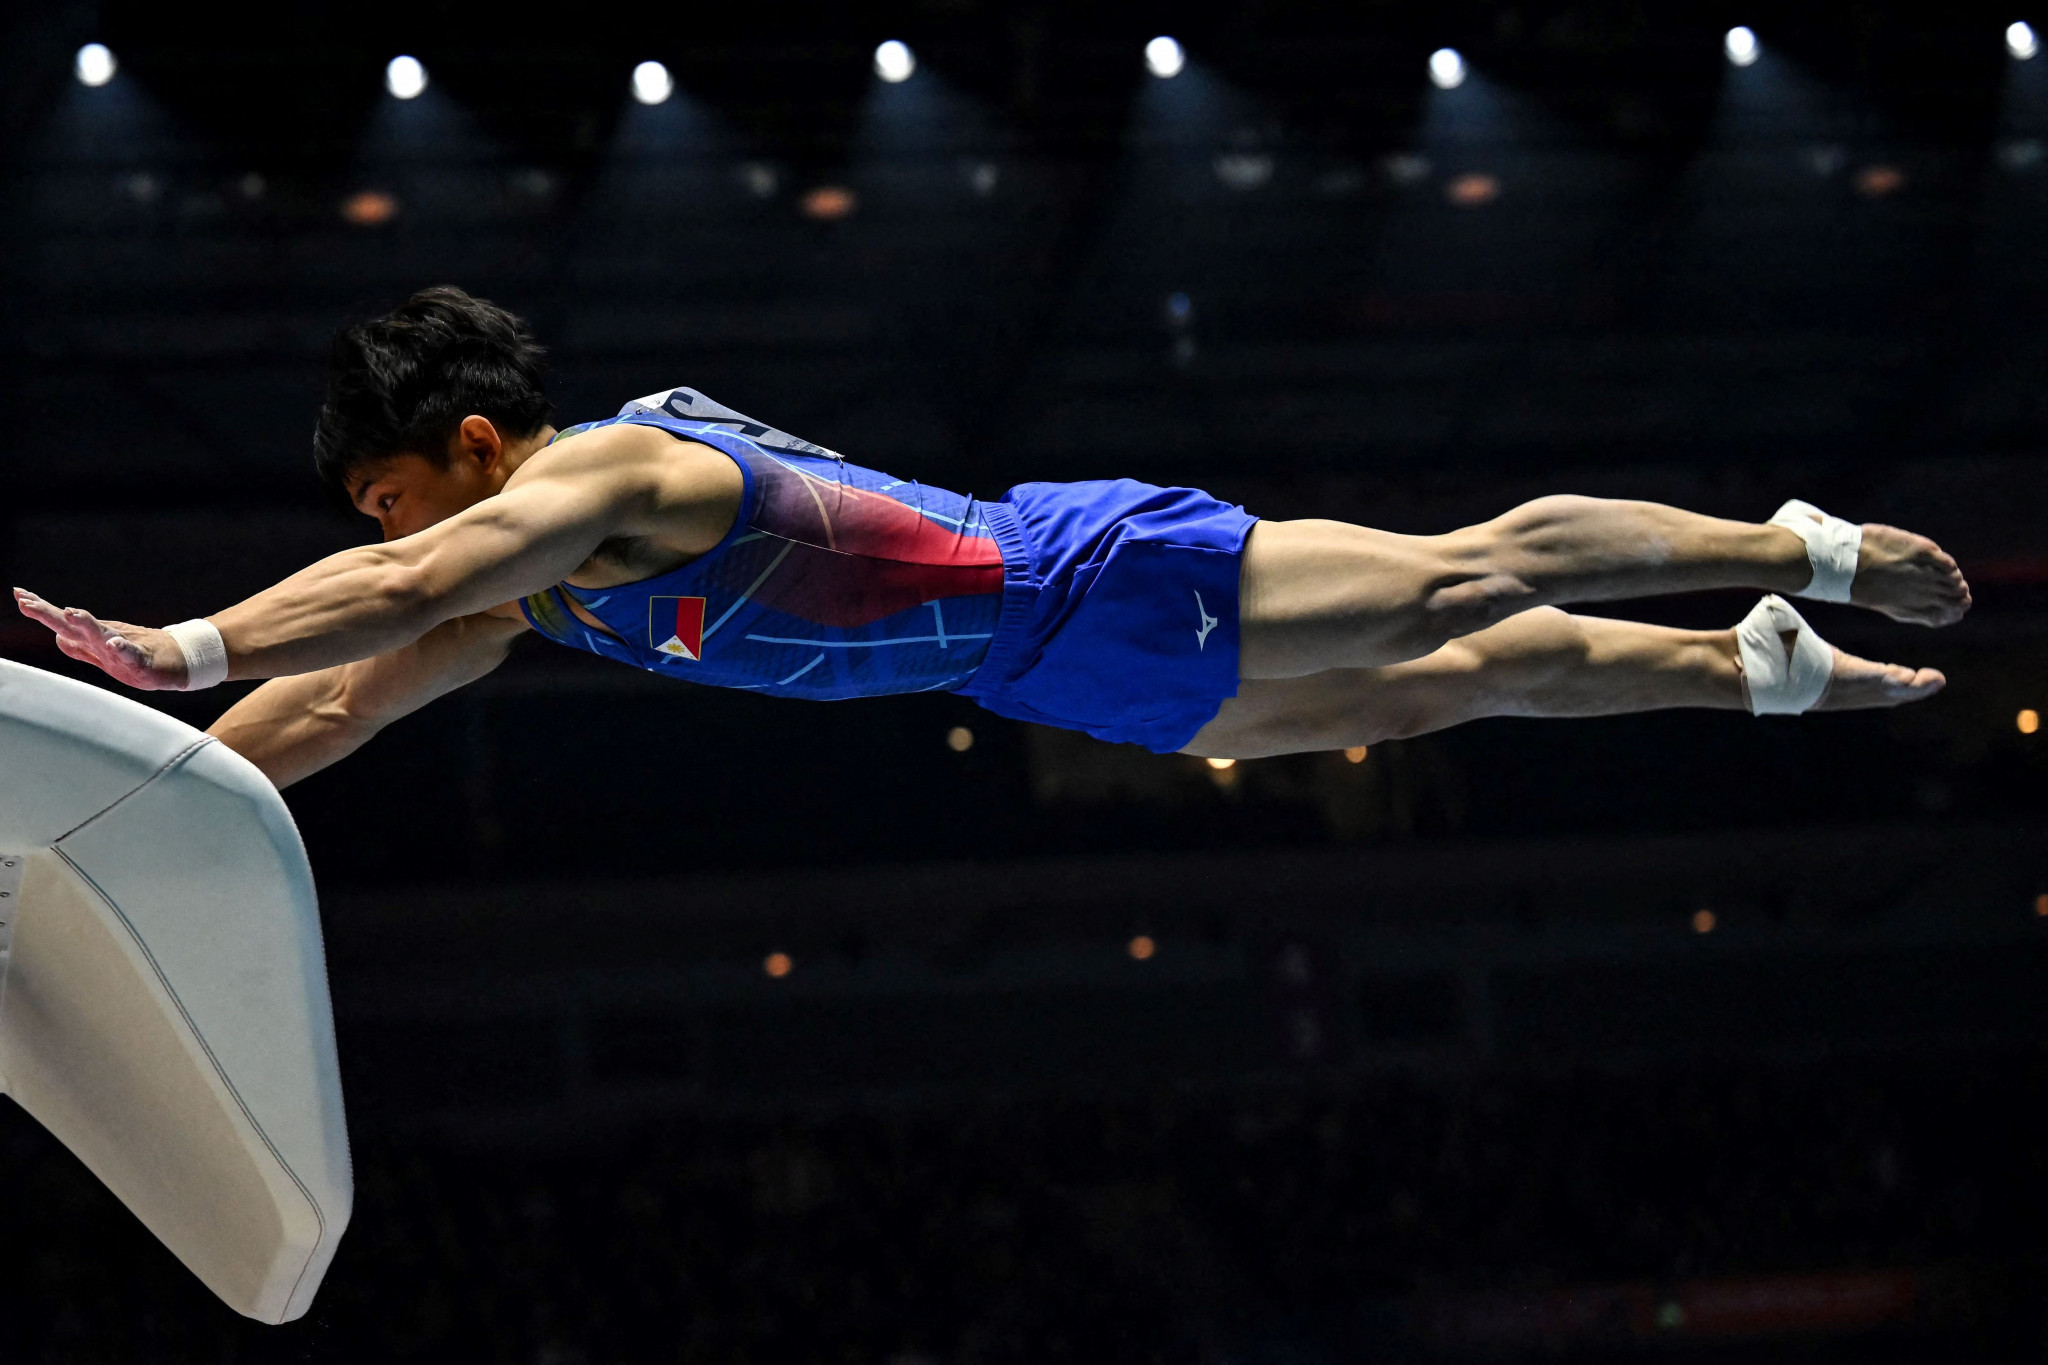 Former world champion Carlos Yulo of the Philippines performed brilliantly in the vault to take gold at the FIG World Cup in Baku ©Getty Images